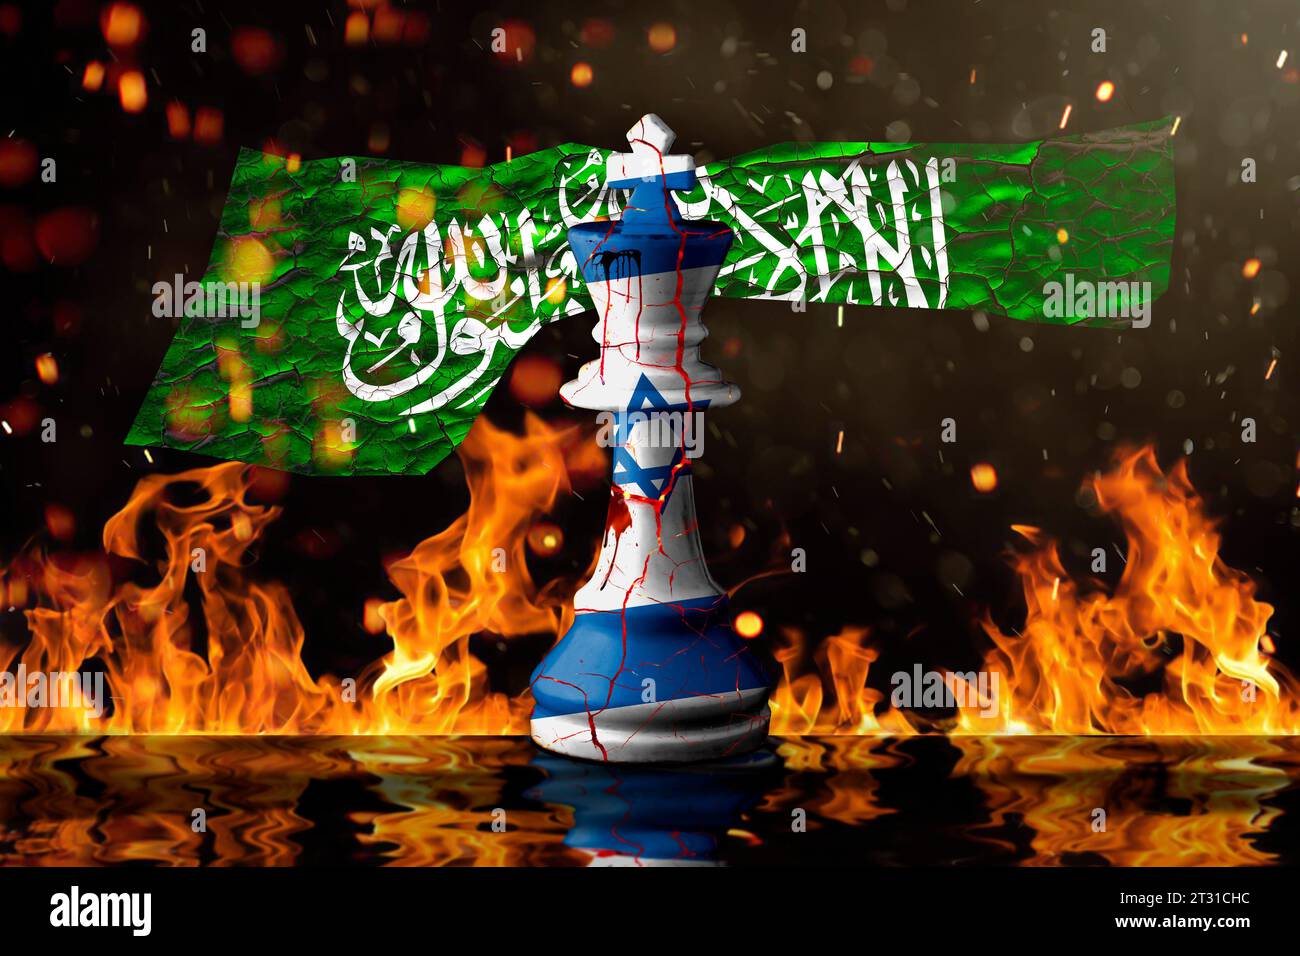 Israel flags paint over cracked chess king. 3D illustration. gaza map in background. Stock Photo